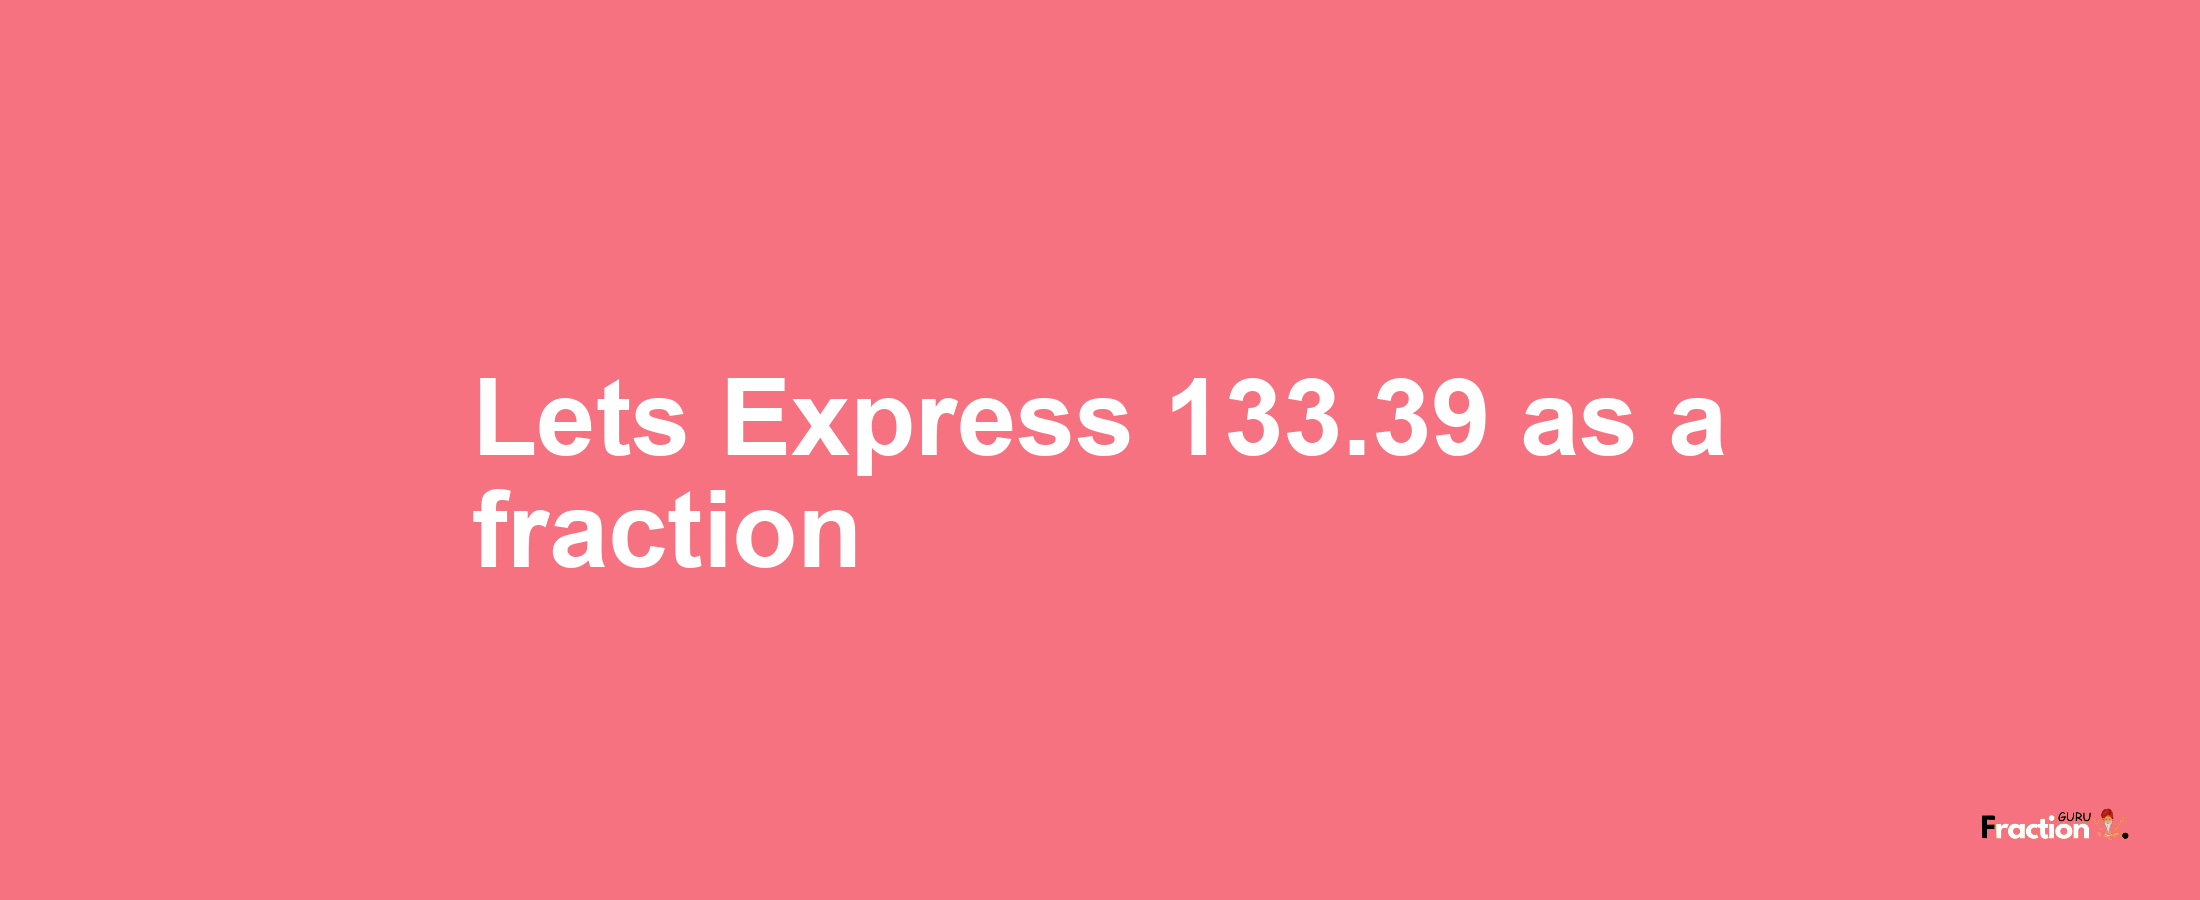 Lets Express 133.39 as afraction